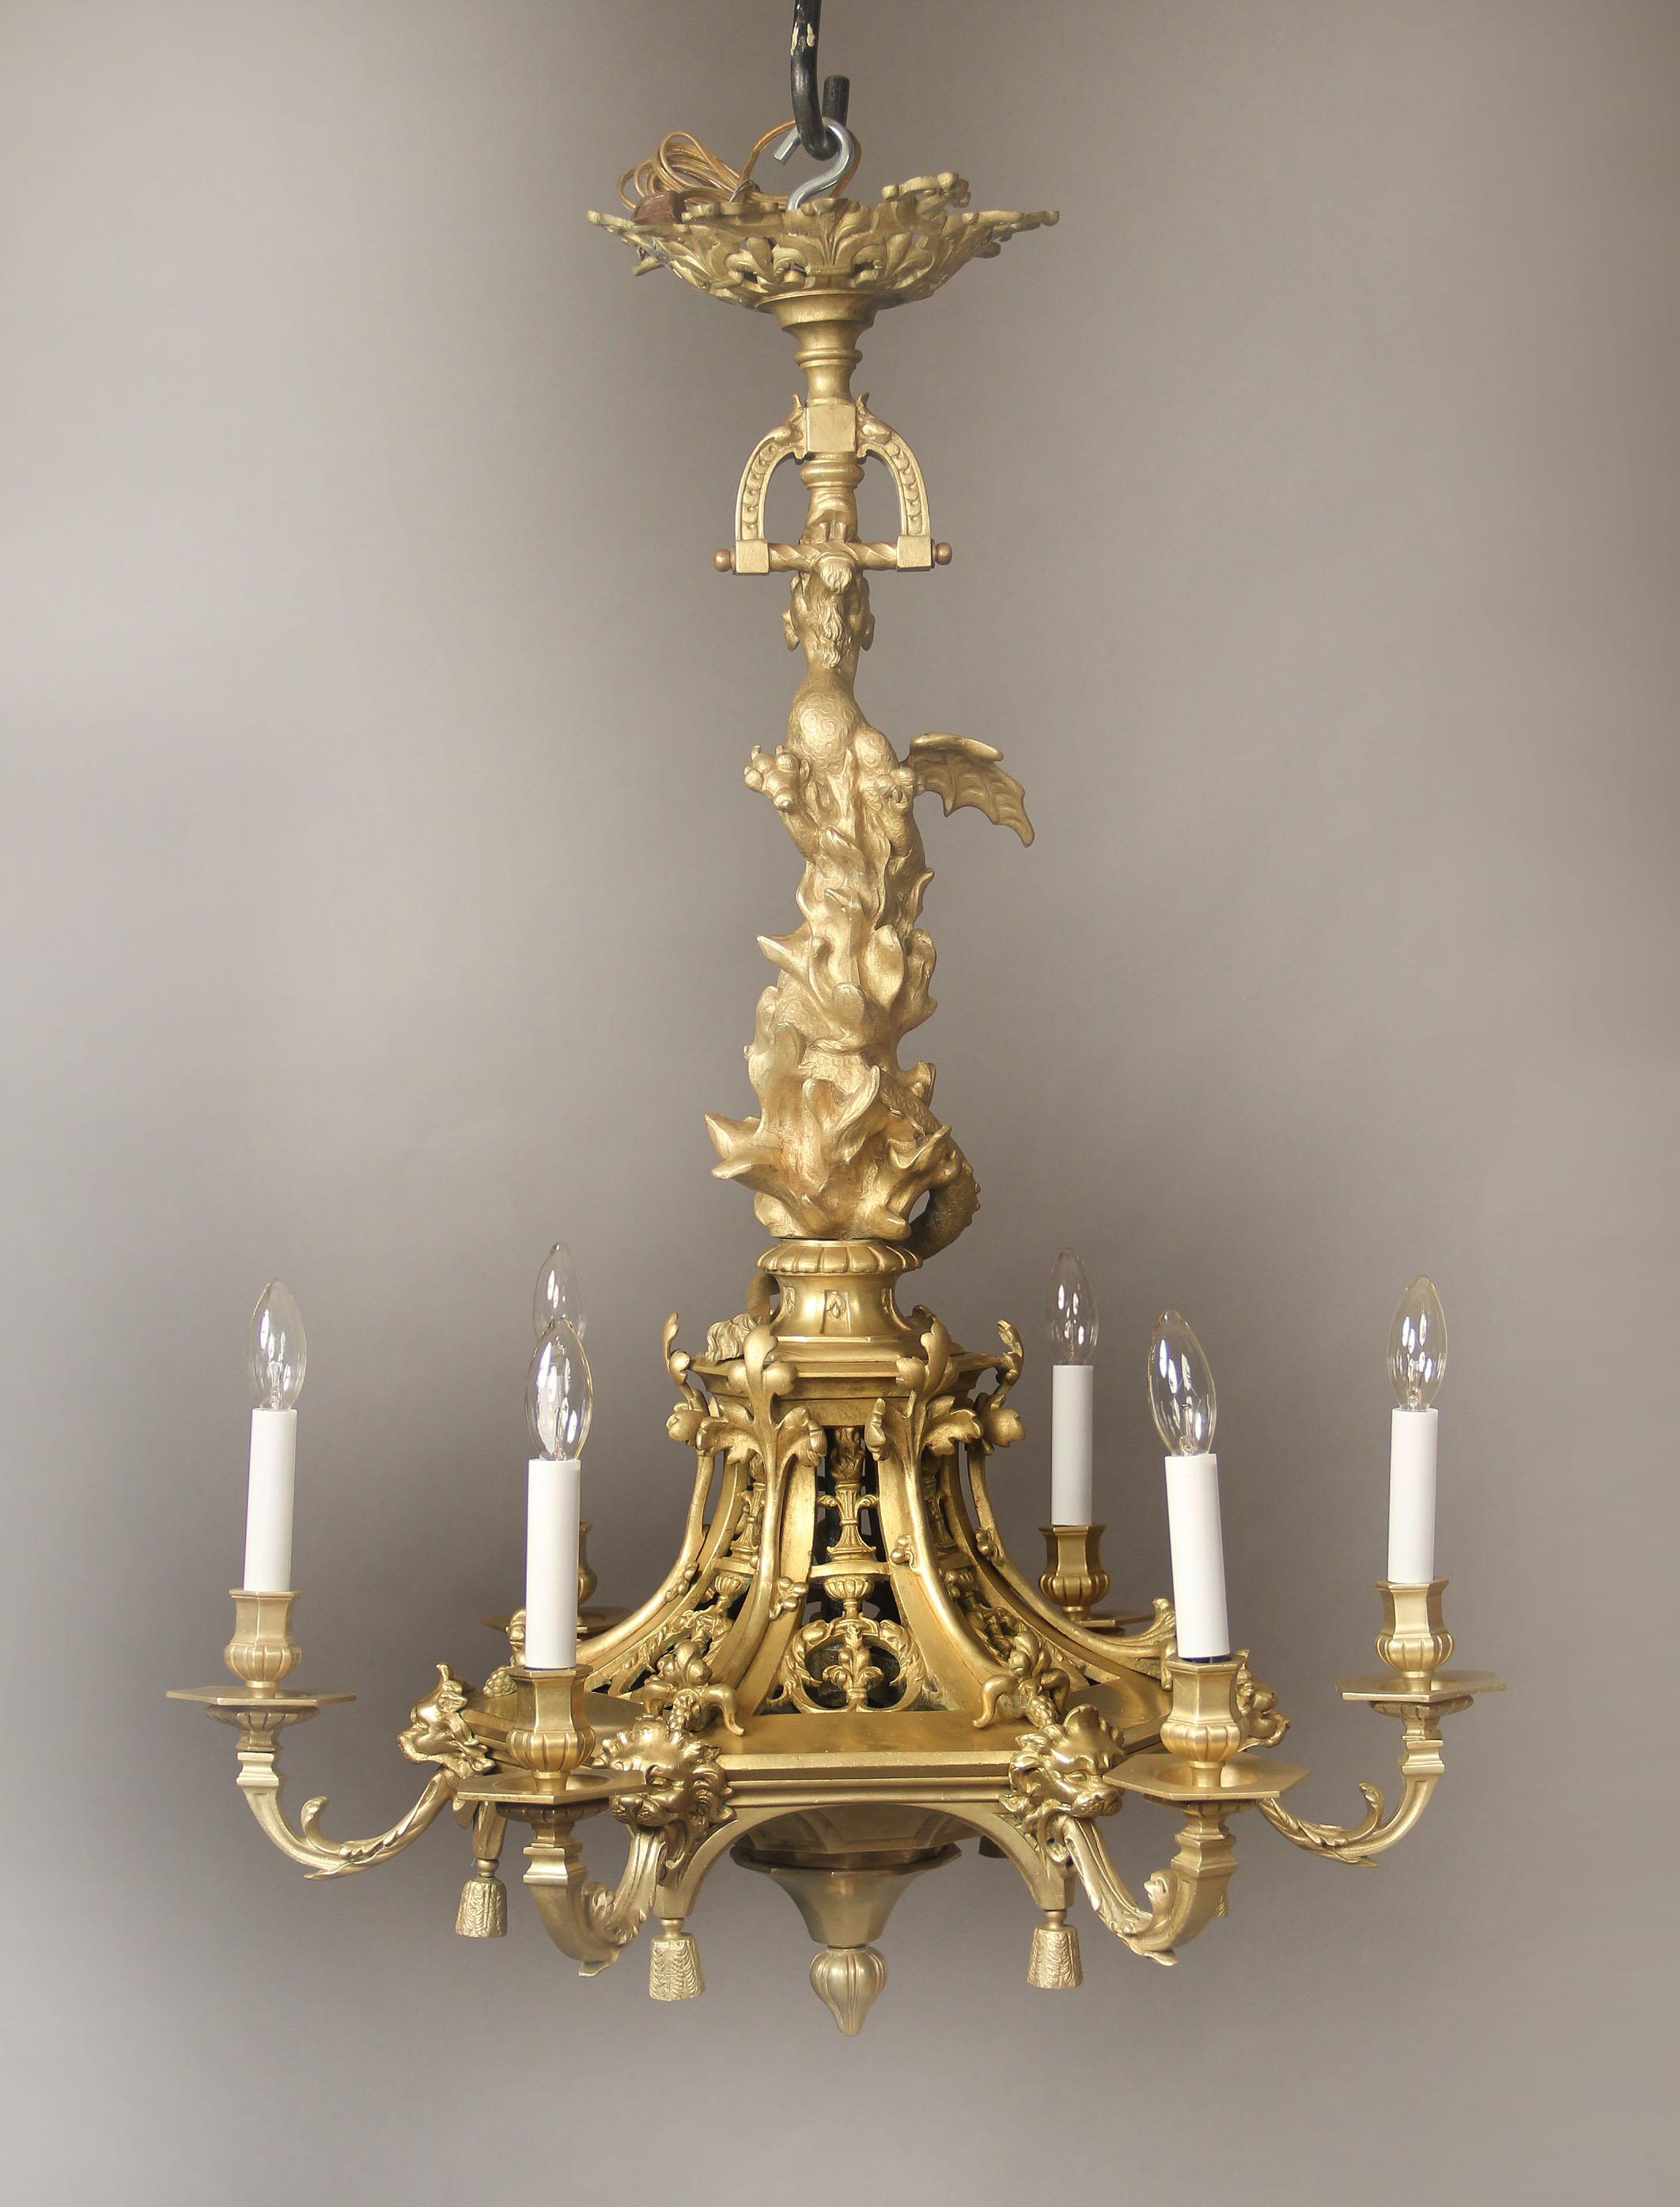 An interesting late 19th century gilt bronze six-light chandelier

The neck designed as a dragon flying through flames, lion masks leading into six perimeter lights.

If you are looking for a chandelier, a lantern or sets of sconces, Charles